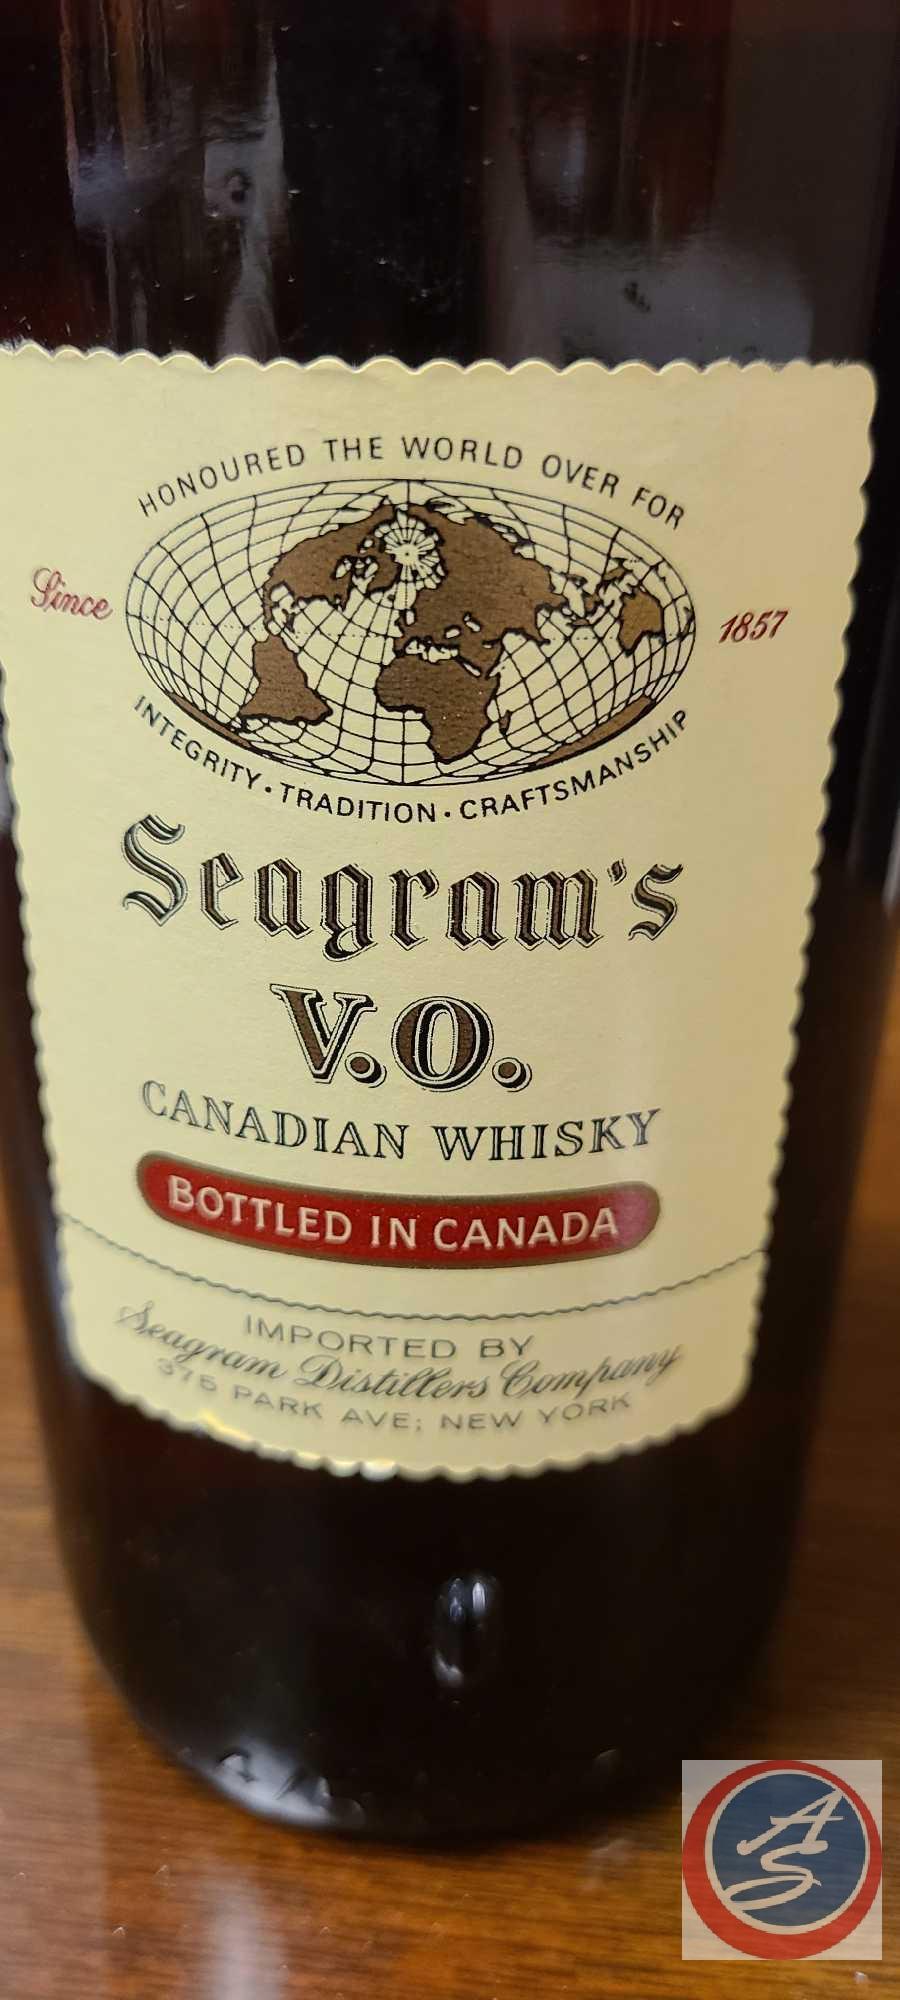 (1) Bottle State of Maryland 1/5 gallon Canadian Seagram's V.O. Canadian Whiskey A Blend Canada's